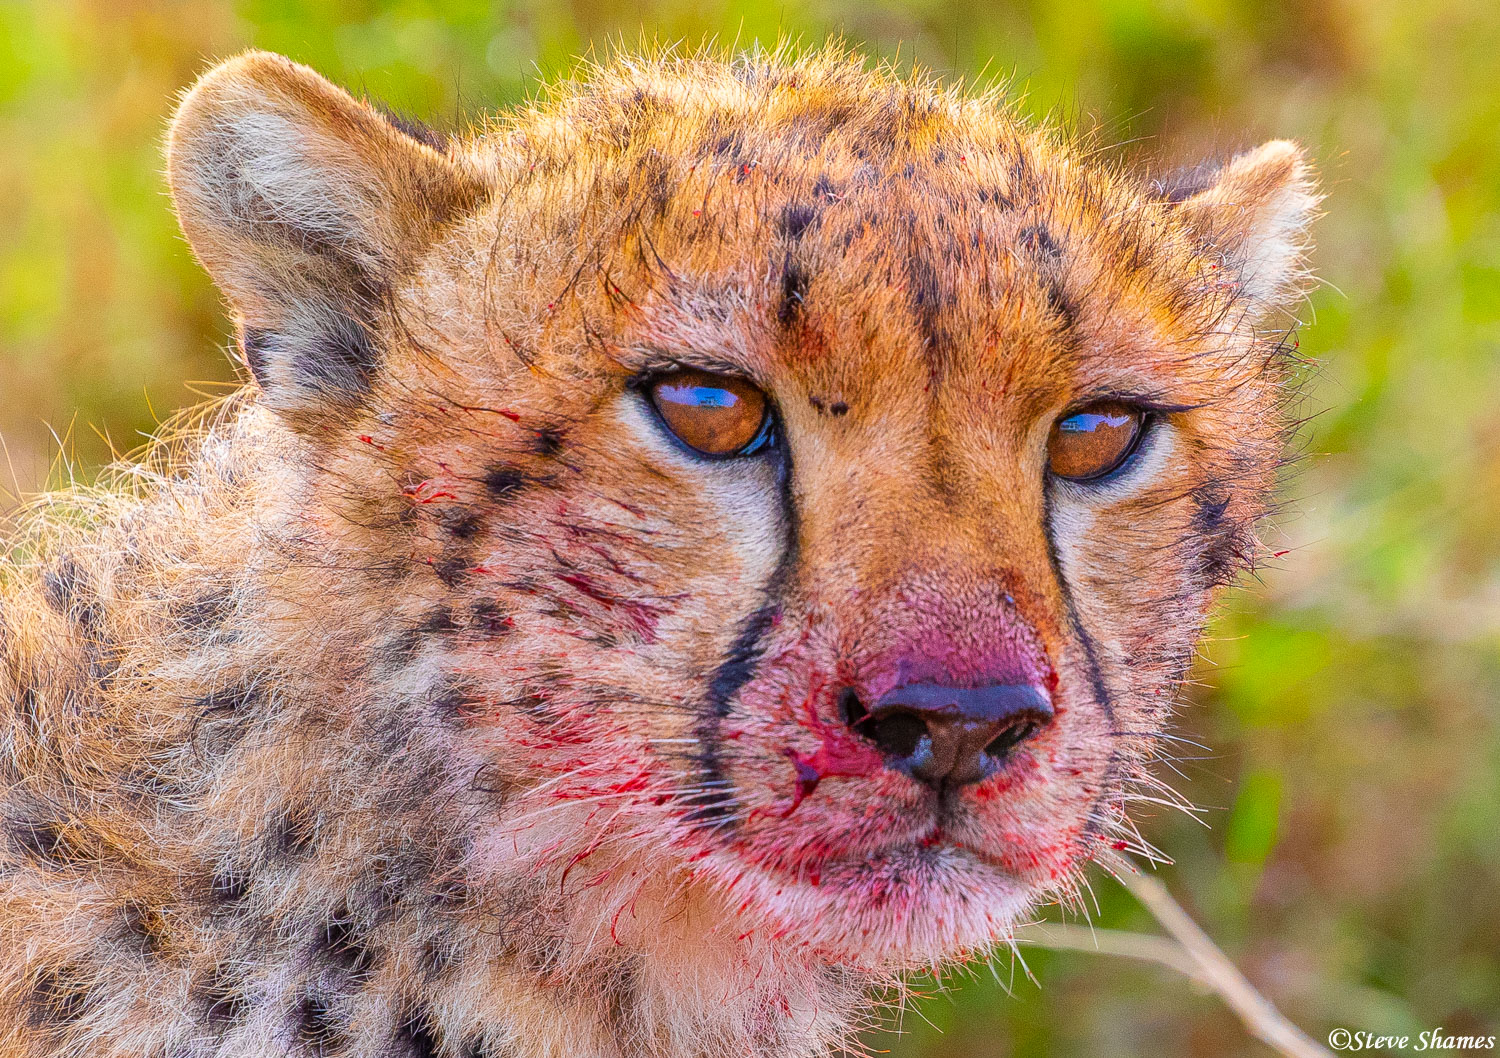 Cheetahs usually end up with a bloody face during eating.